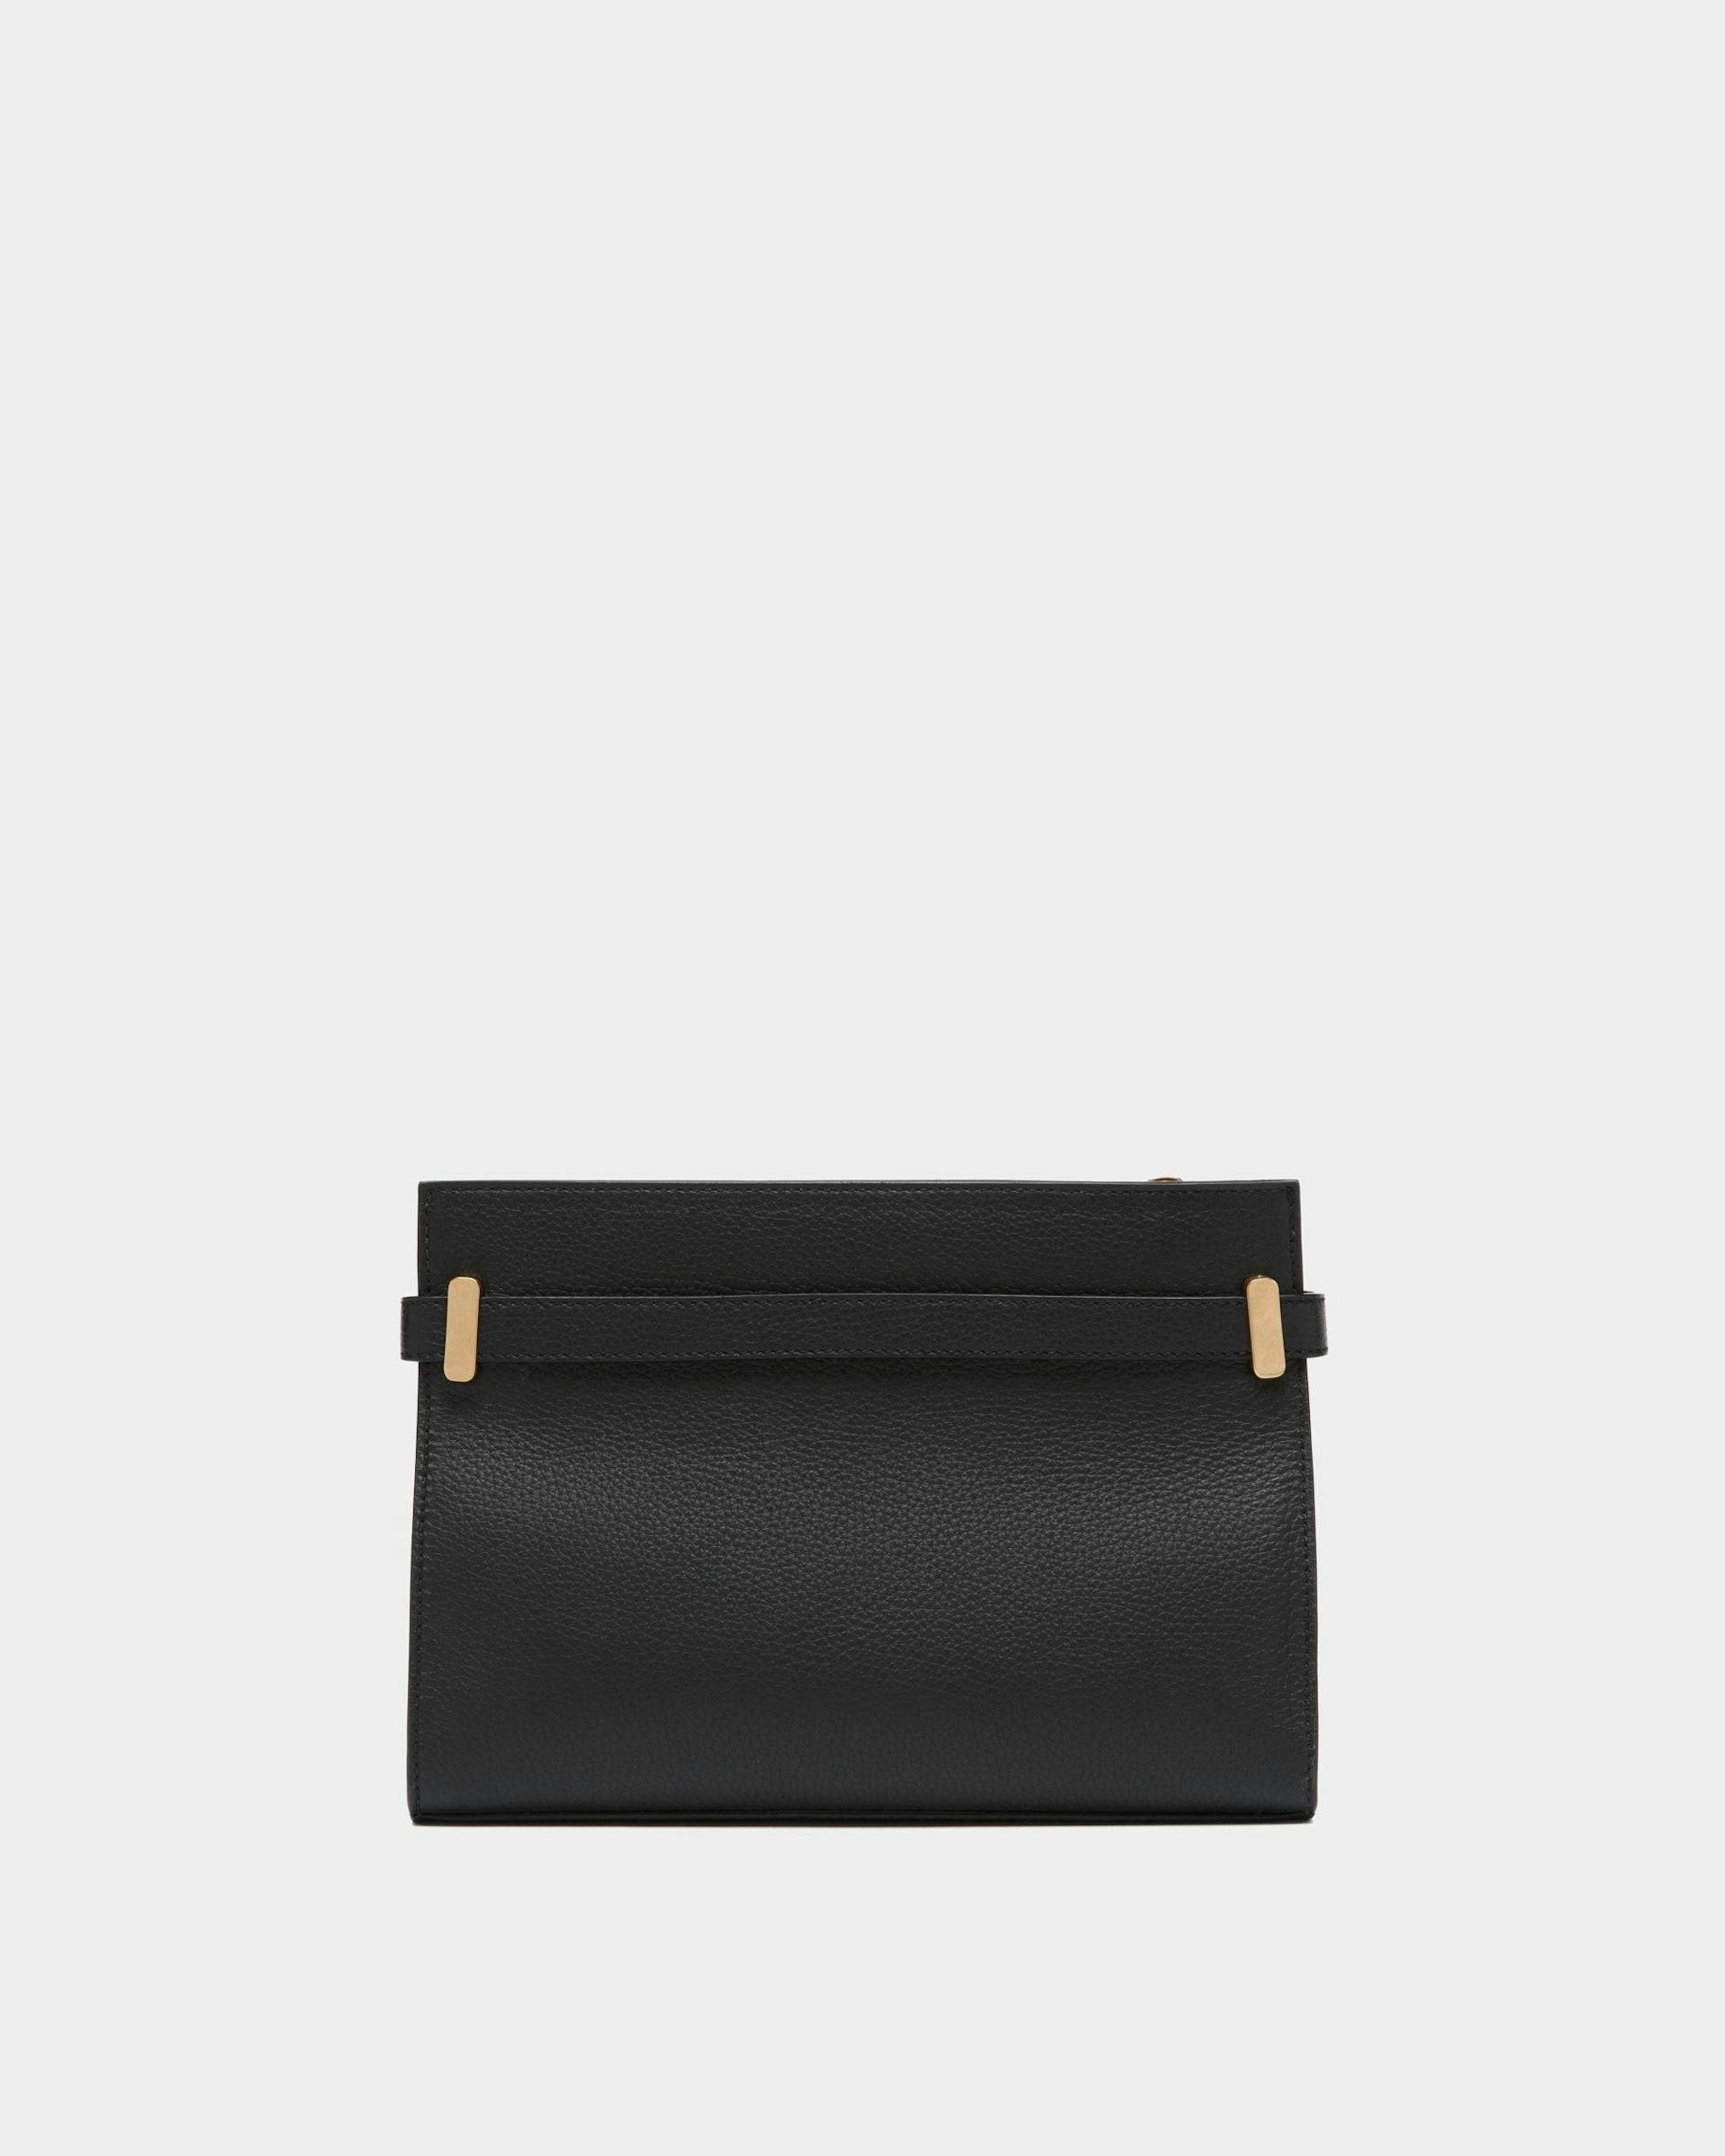 Women's Carriage Shoulder Bag in Black Grained Leather | Bally | Still Life Back